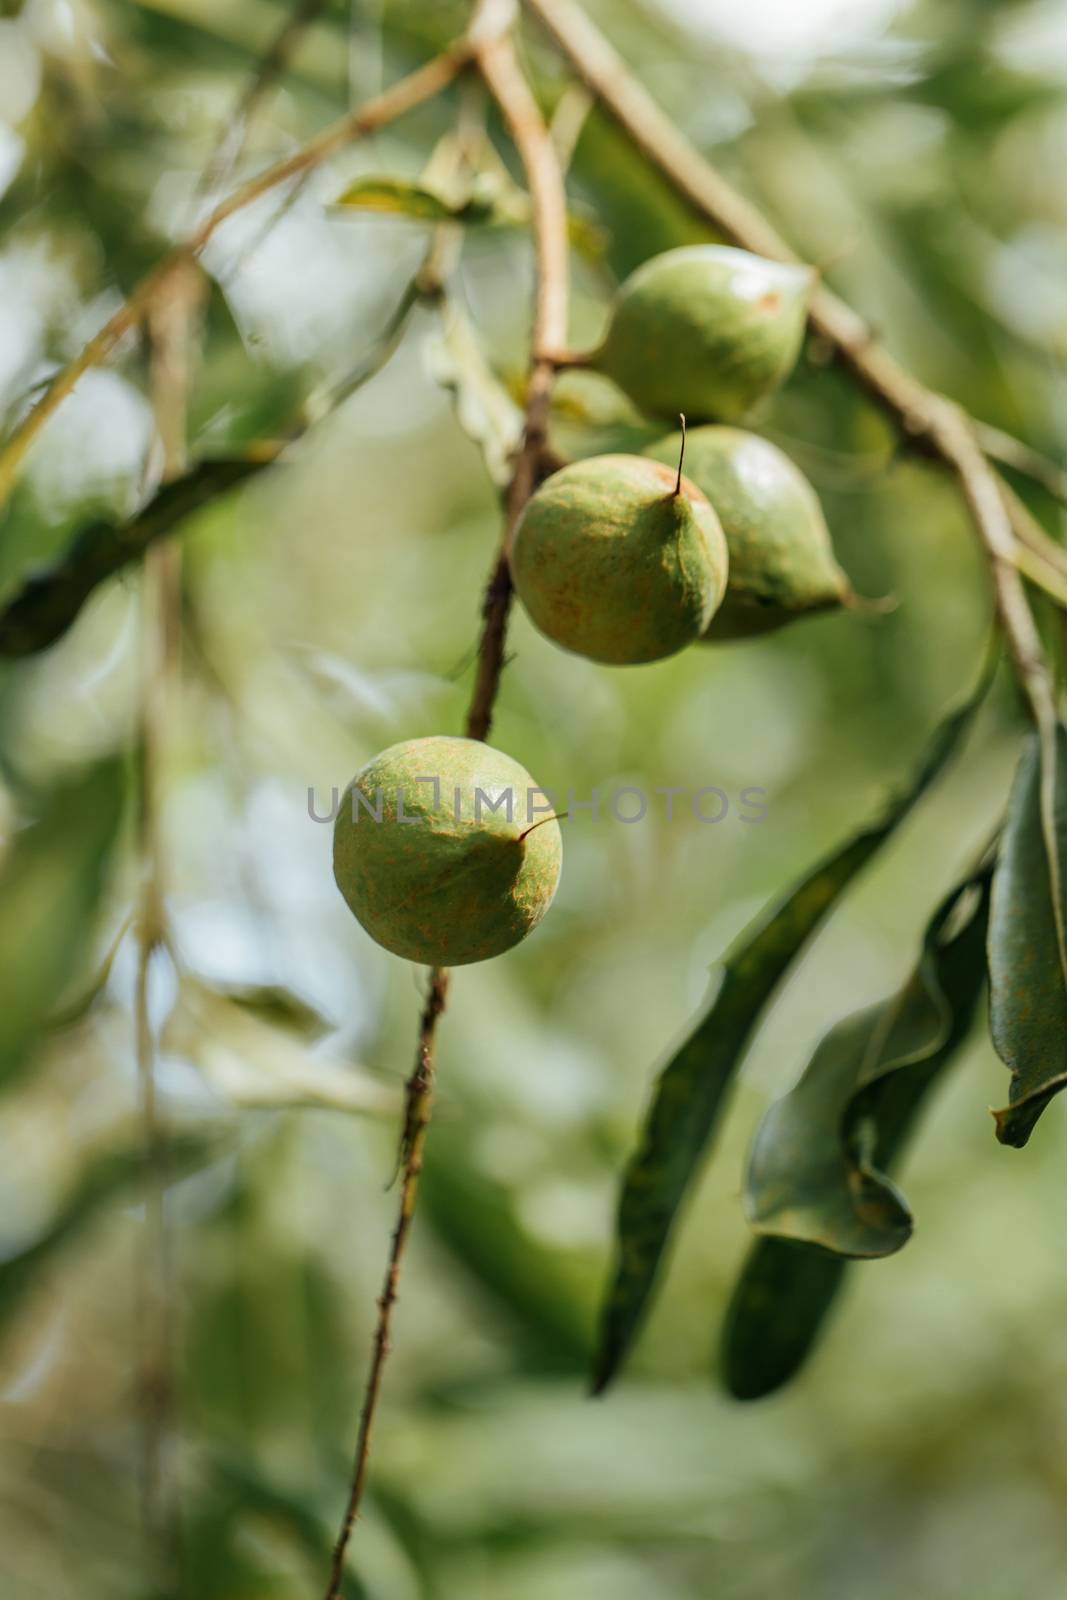 Macadamia nuts ready for harvesting by freedomnaruk